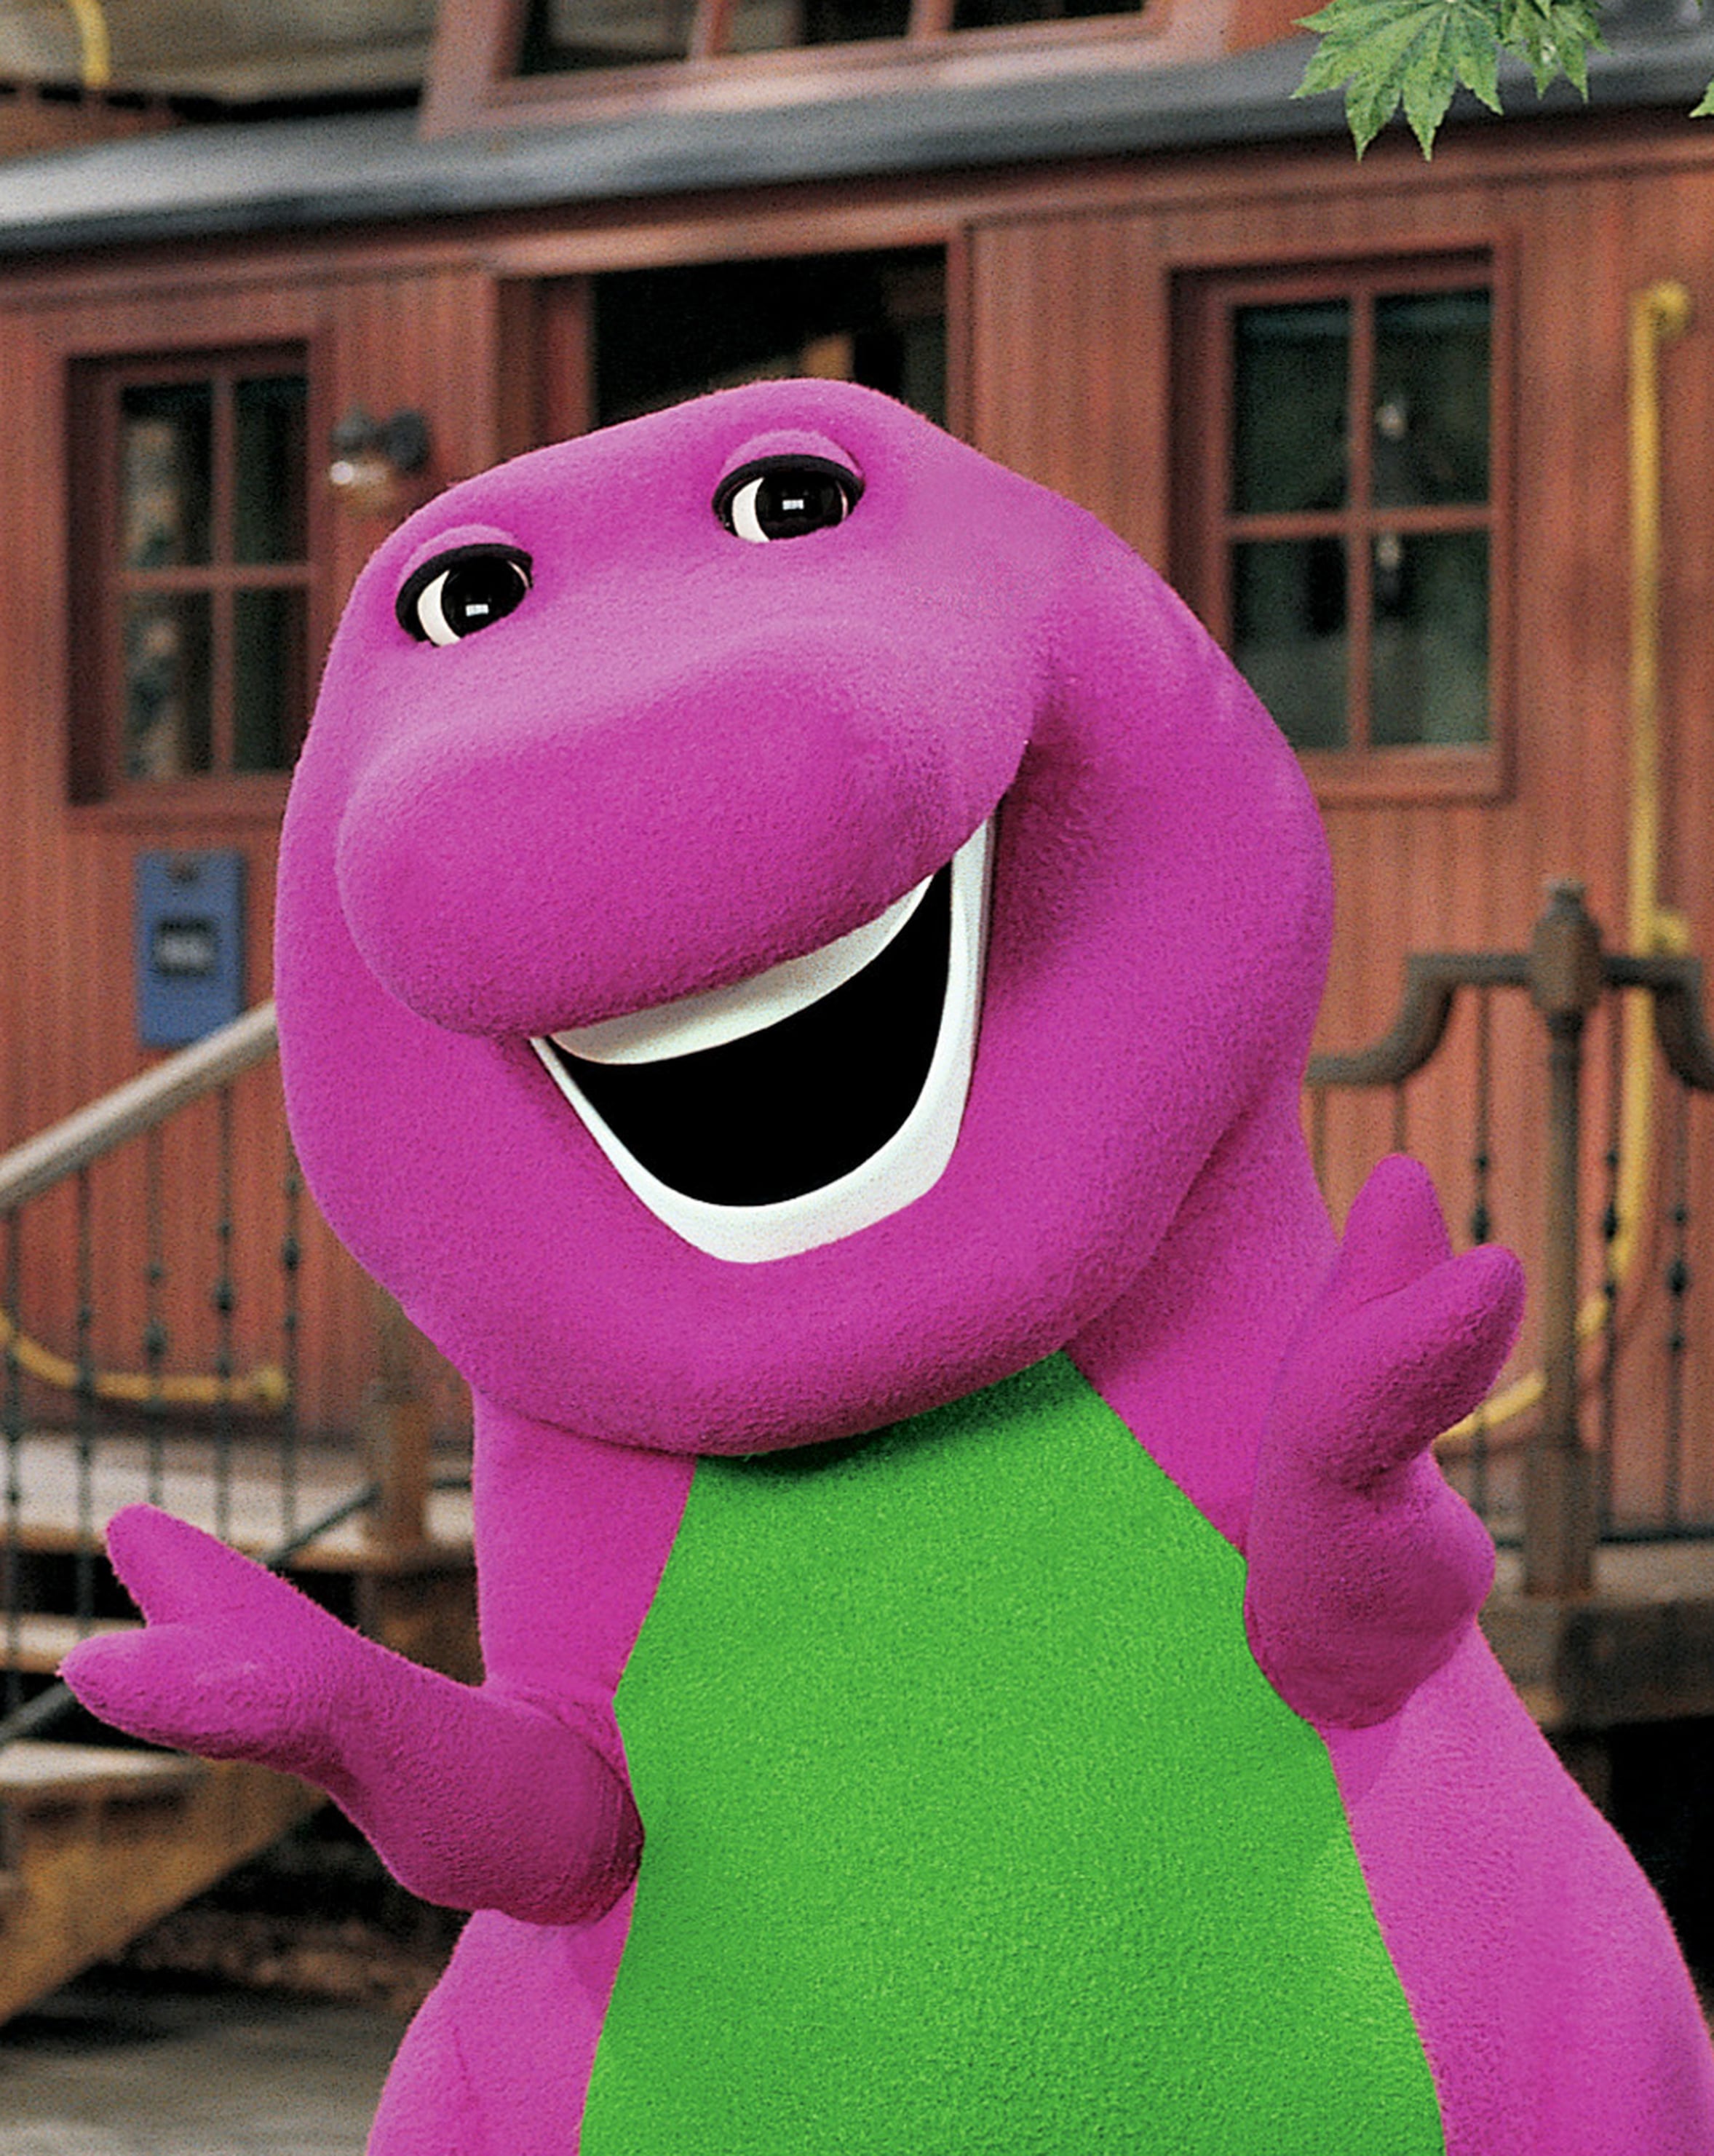 Get Out’s Daniel Kaluuya Is Teaming Up With Mattel to Produce a Barney Movie